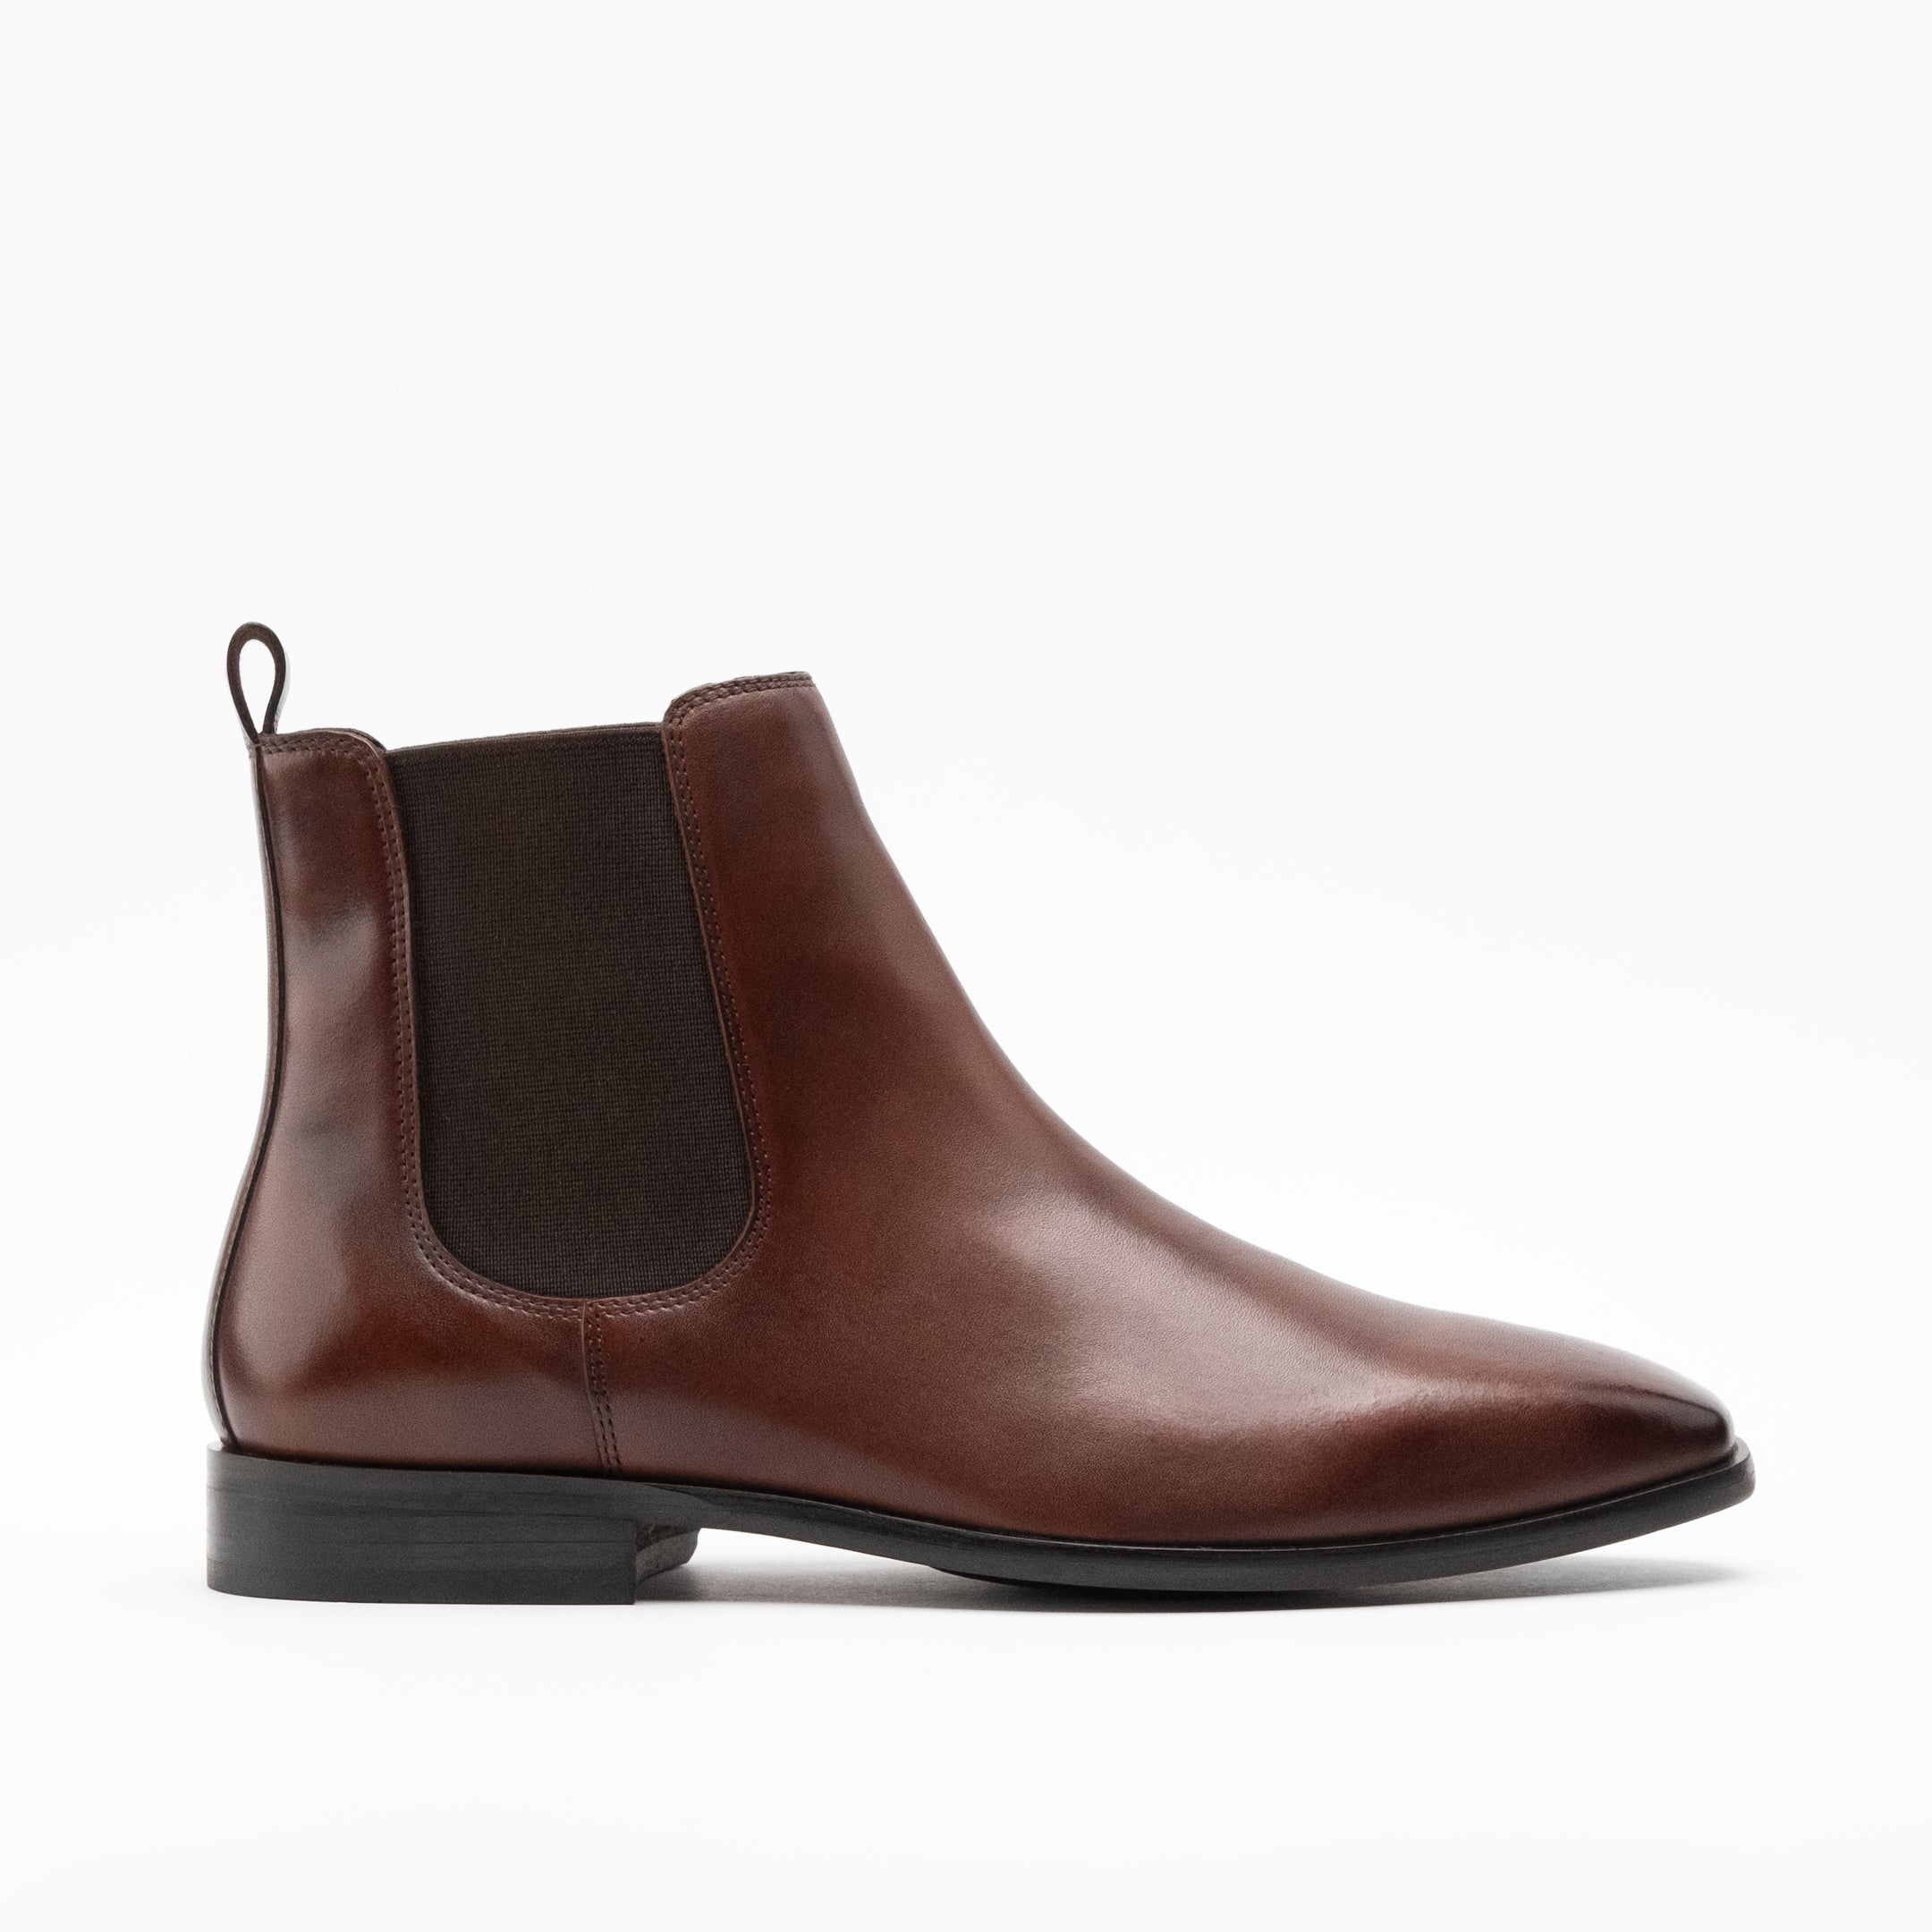 Walk London Mens City Chelsea Boot in Brown Leather